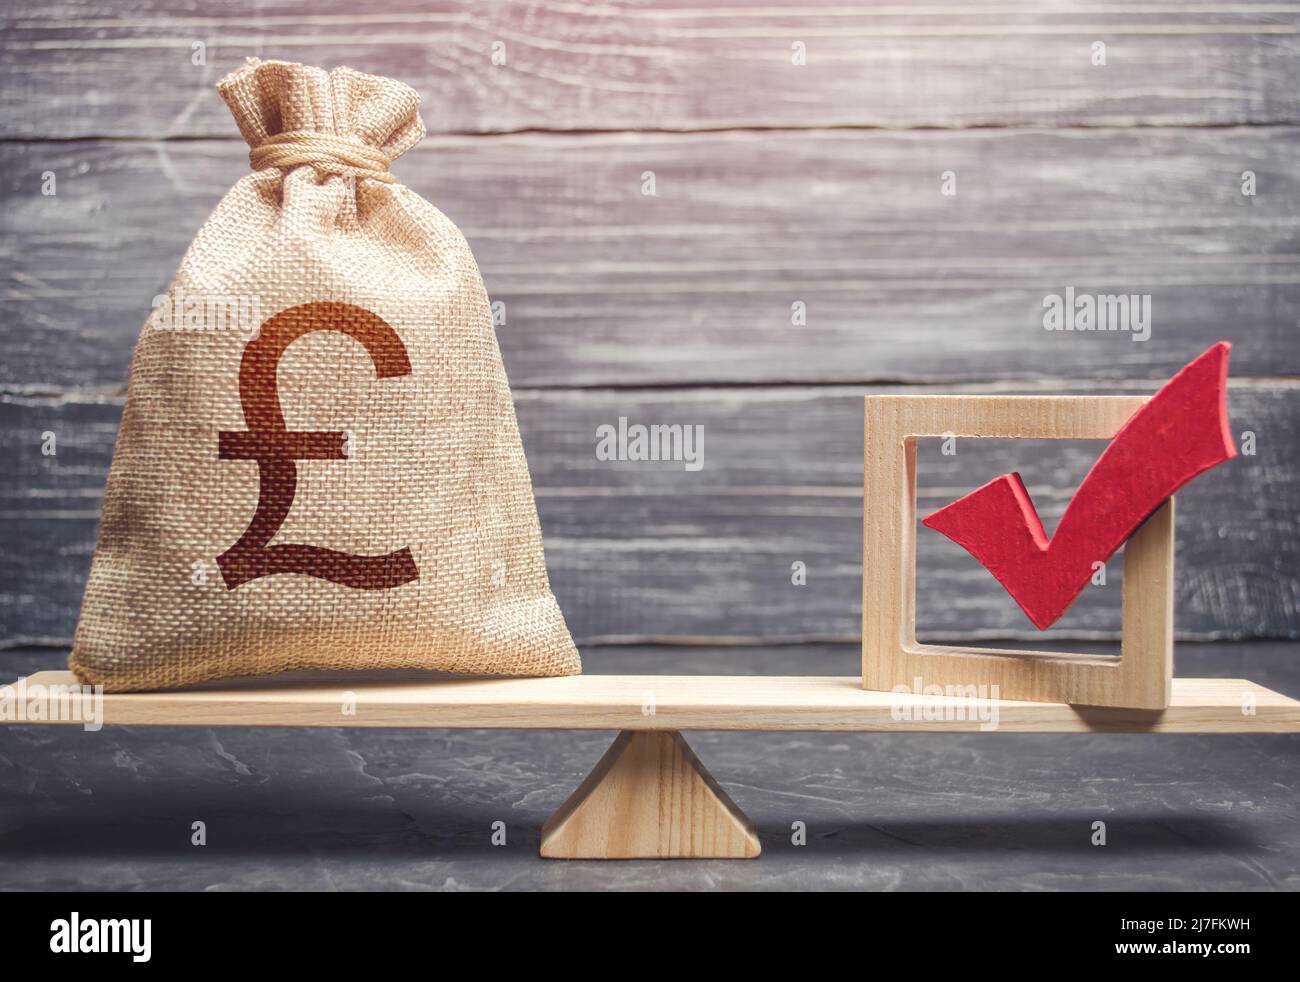 Red vote tick and a british pound sterling money bag on scales. Estimating cost of making a decision and consequences in the future. Corruption risks. Stock Photo